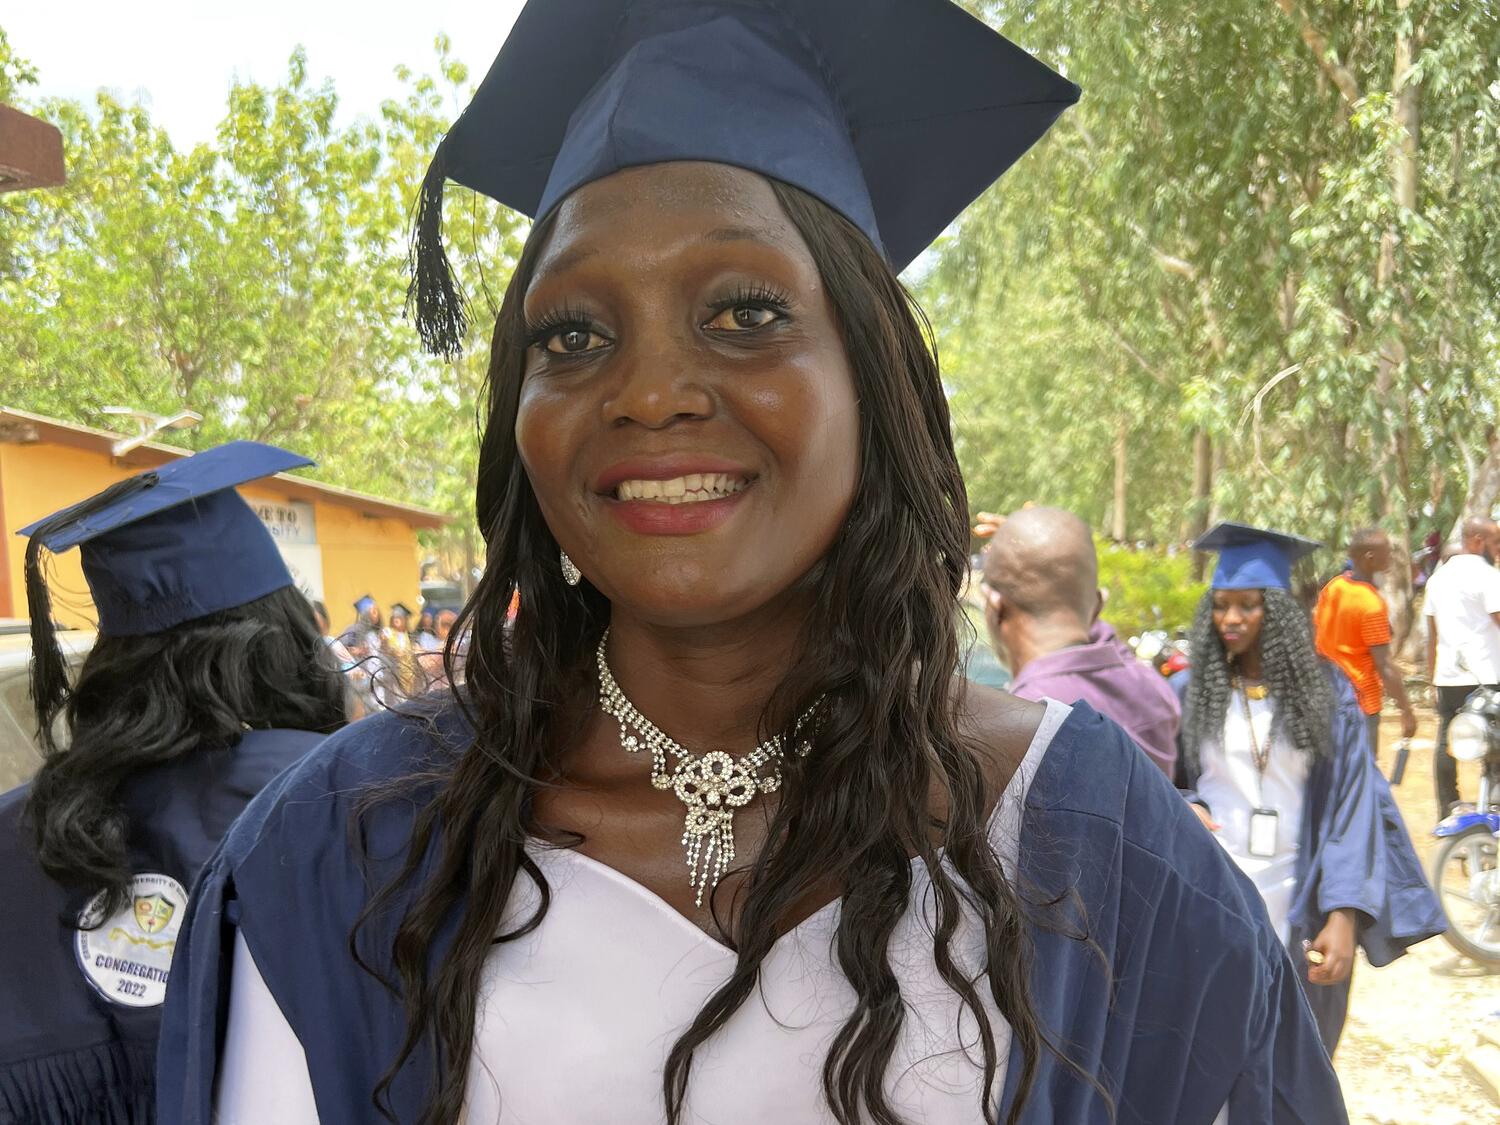 Jariatu in her gown and mortarboard during her graduation as a teacher